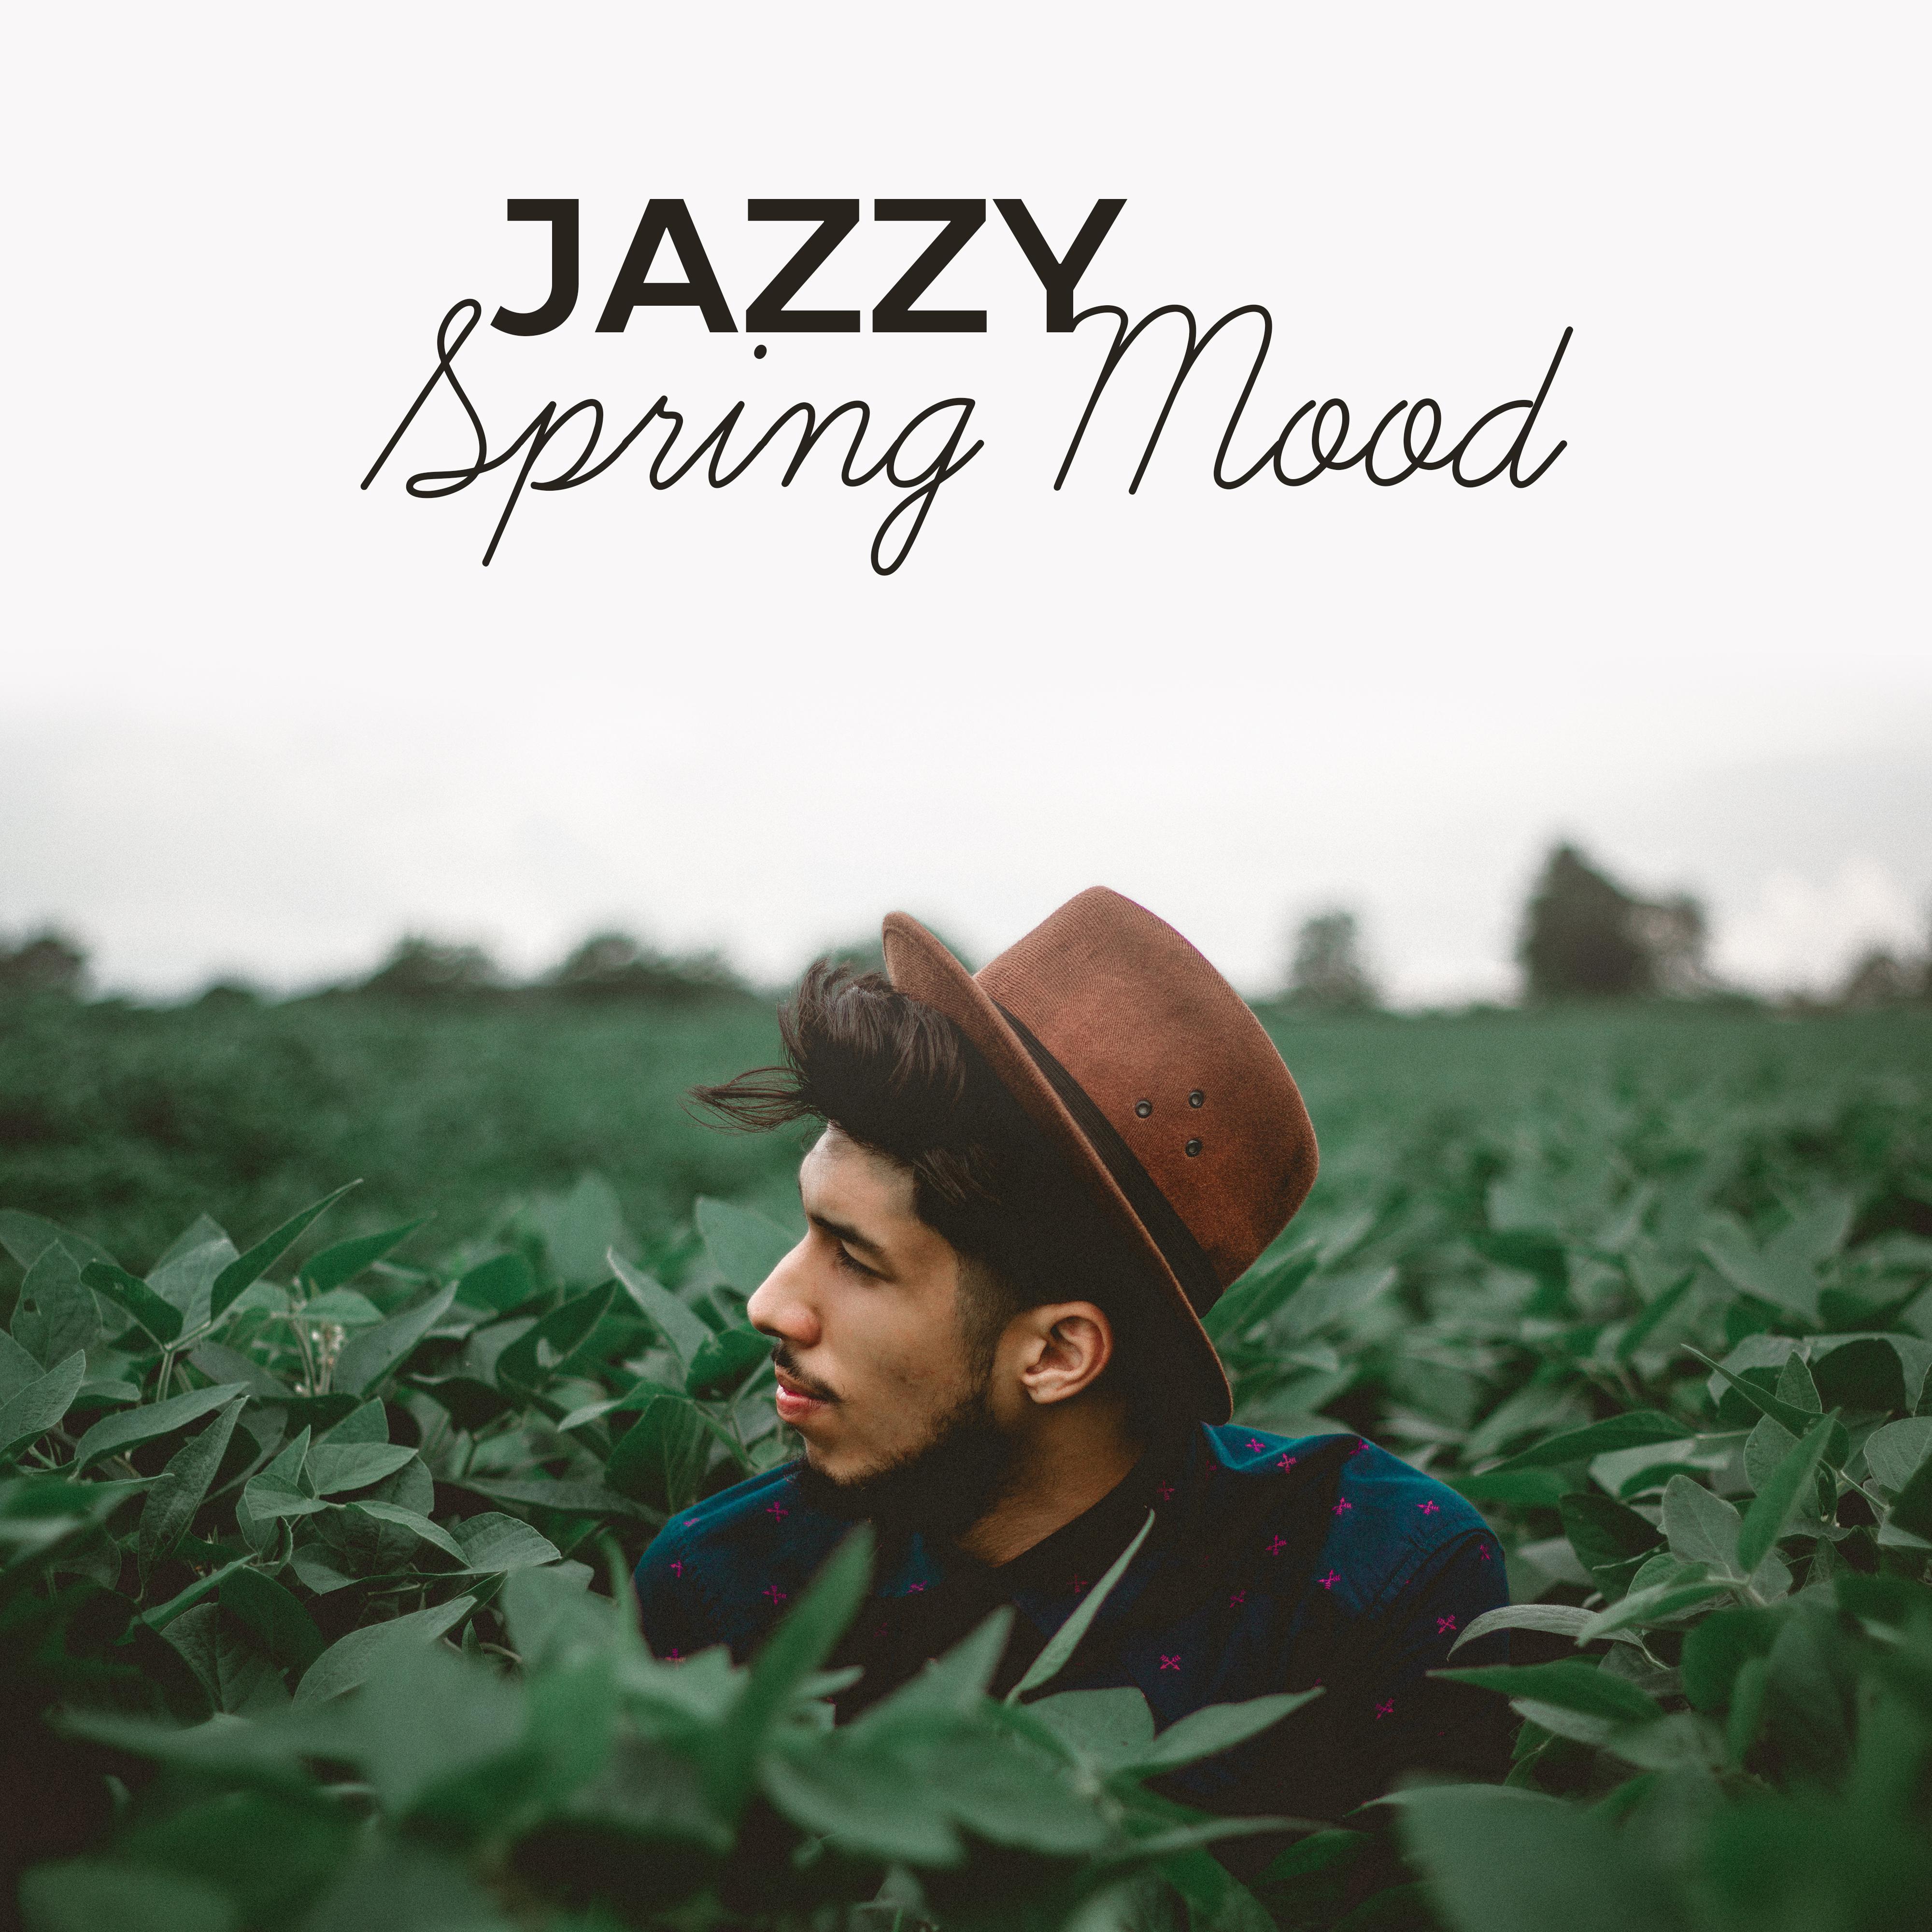 Jazzy Spring Mood  Easy Listening Jazz, Instrumental, Smooth Jazz, Relaxed Lounge, Piano Bar